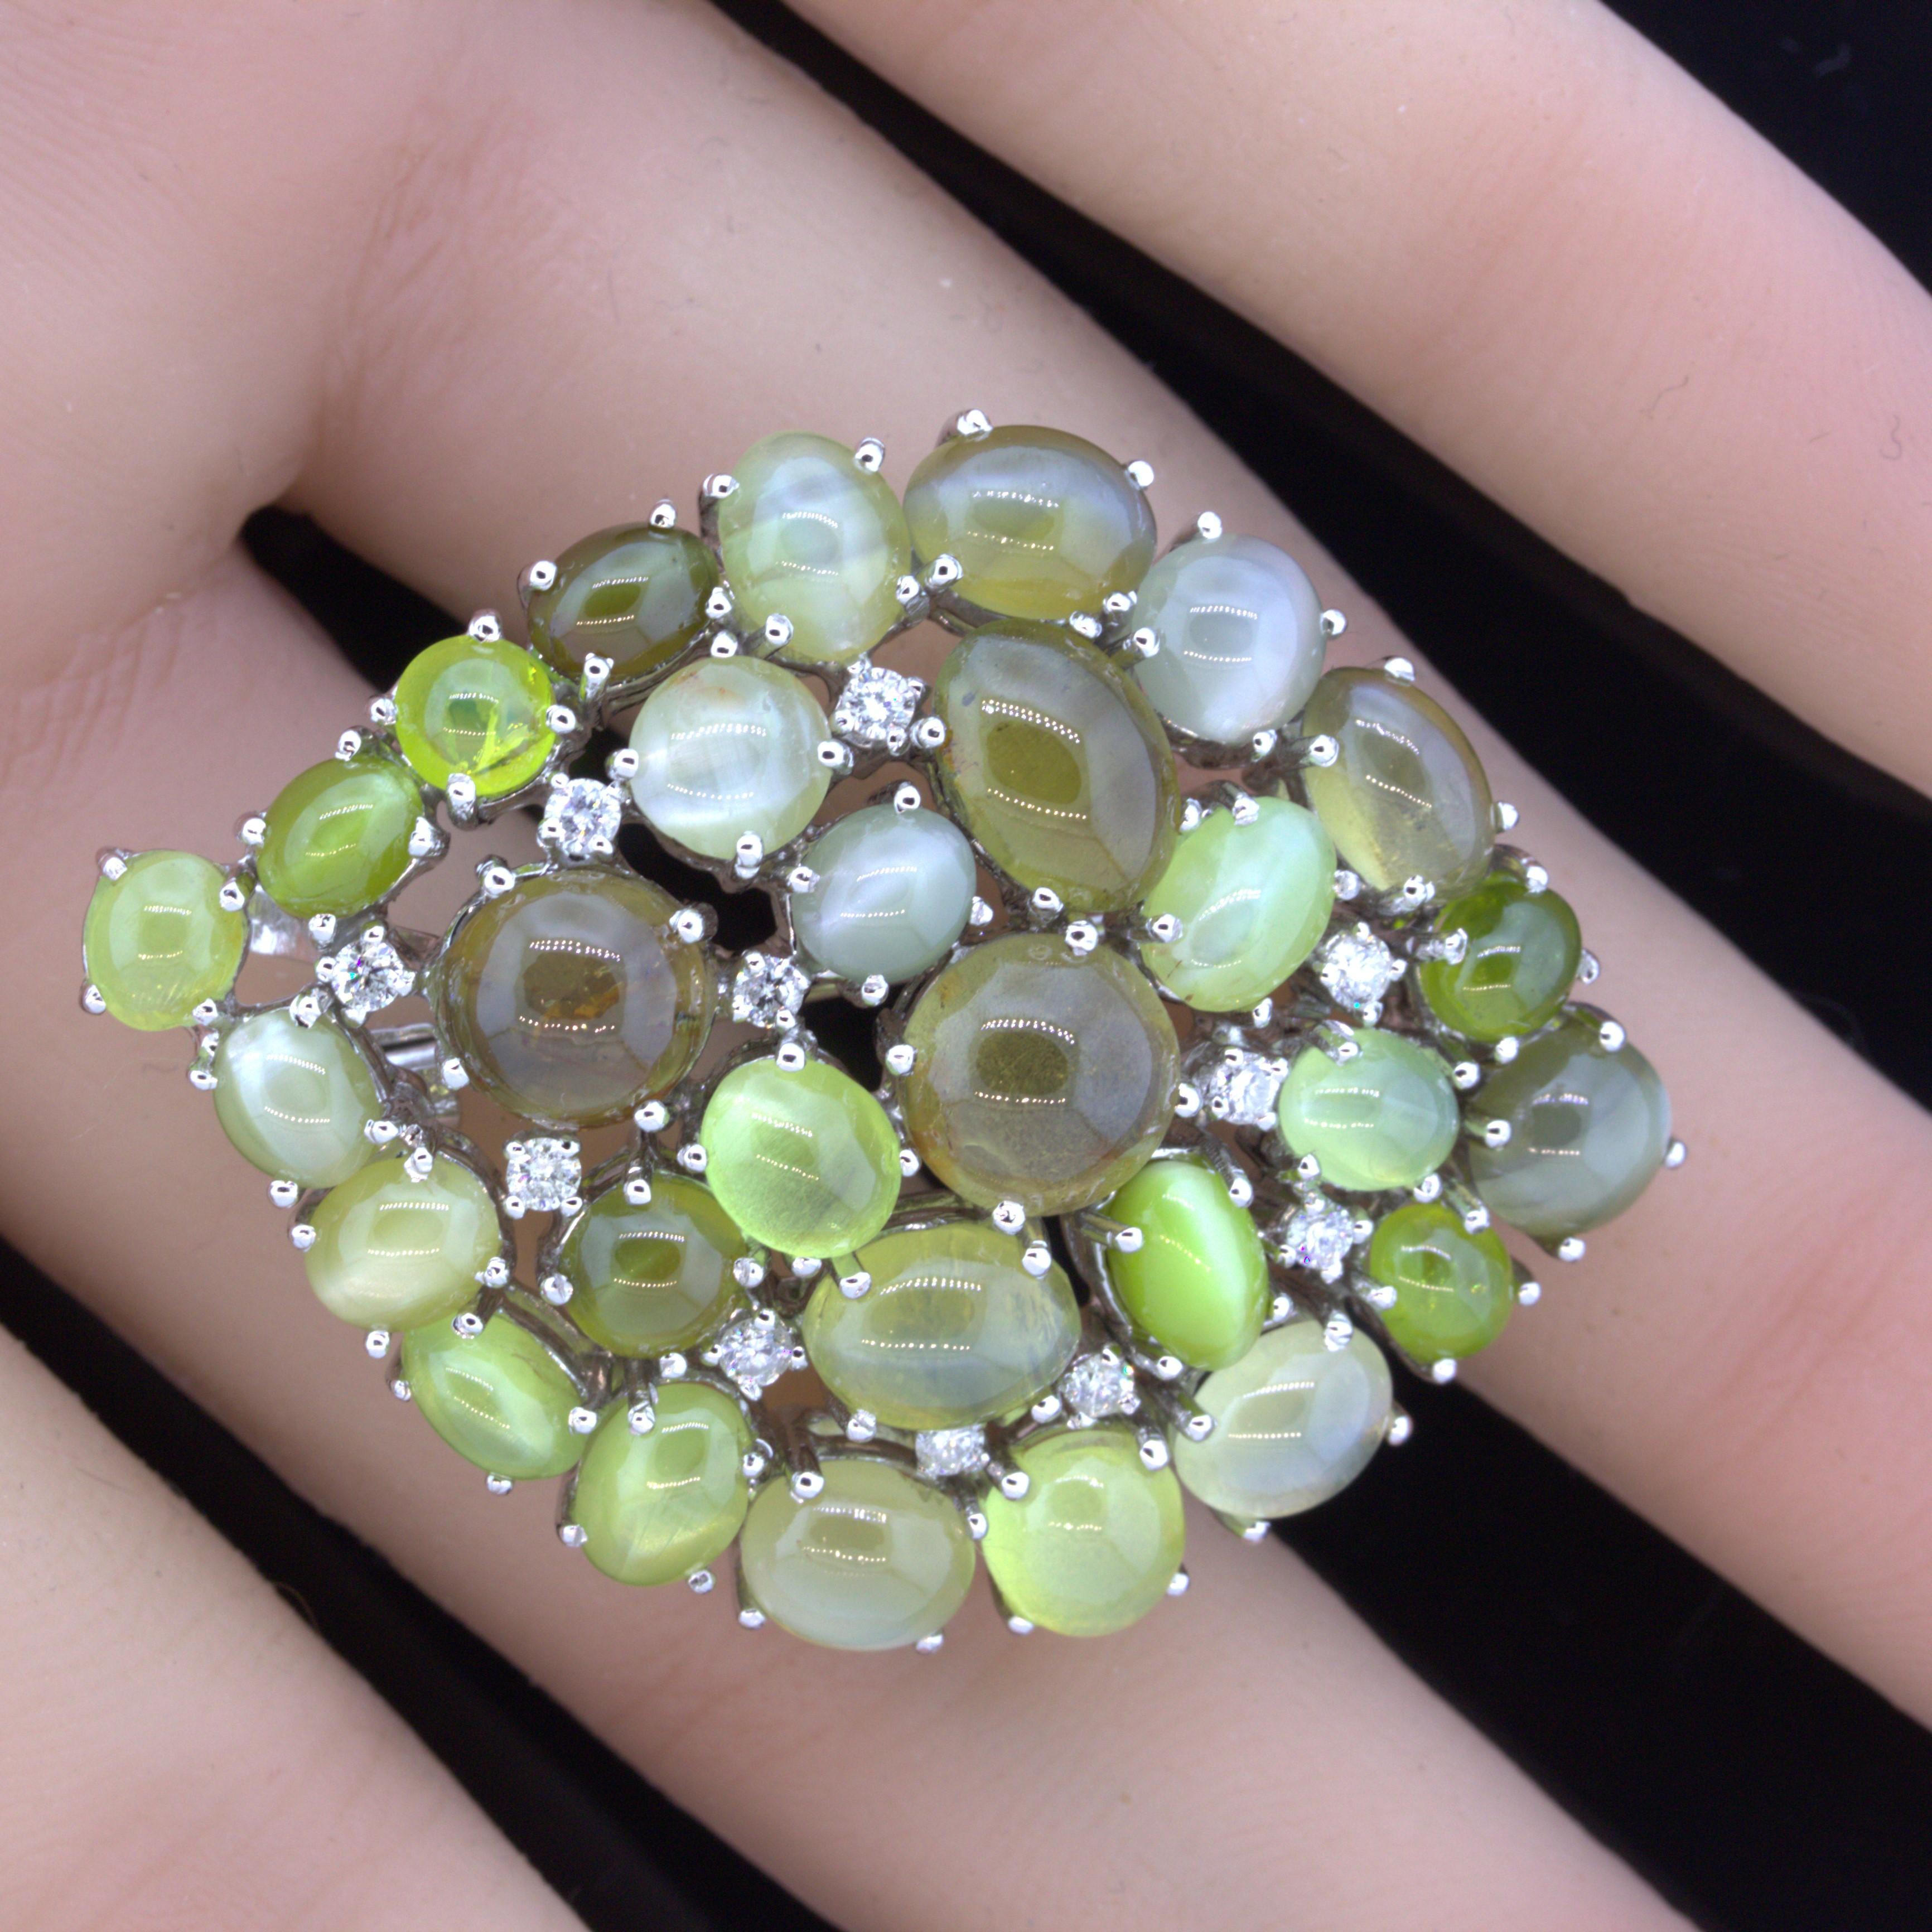 Cats Eye Chrysoberyl Diamond 18k White Gold Brooch-Pendant In Good Condition For Sale In Beverly Hills, CA